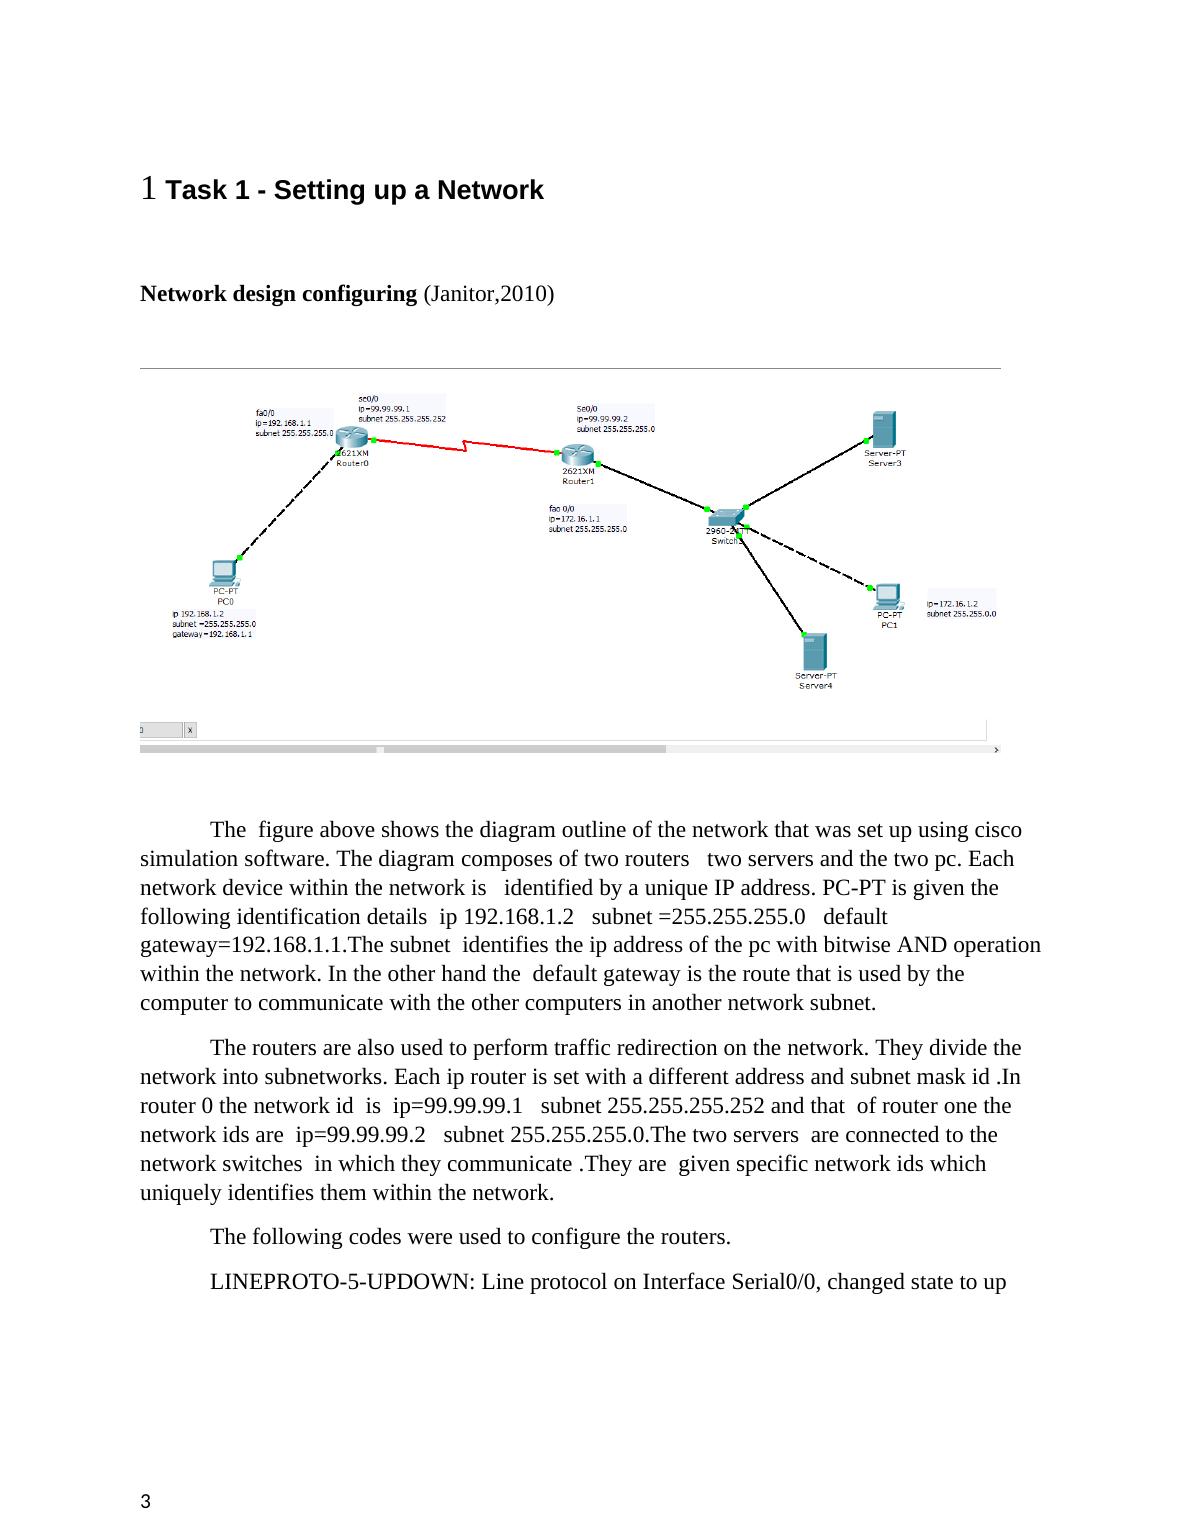 Network design and analysis Assignment_3